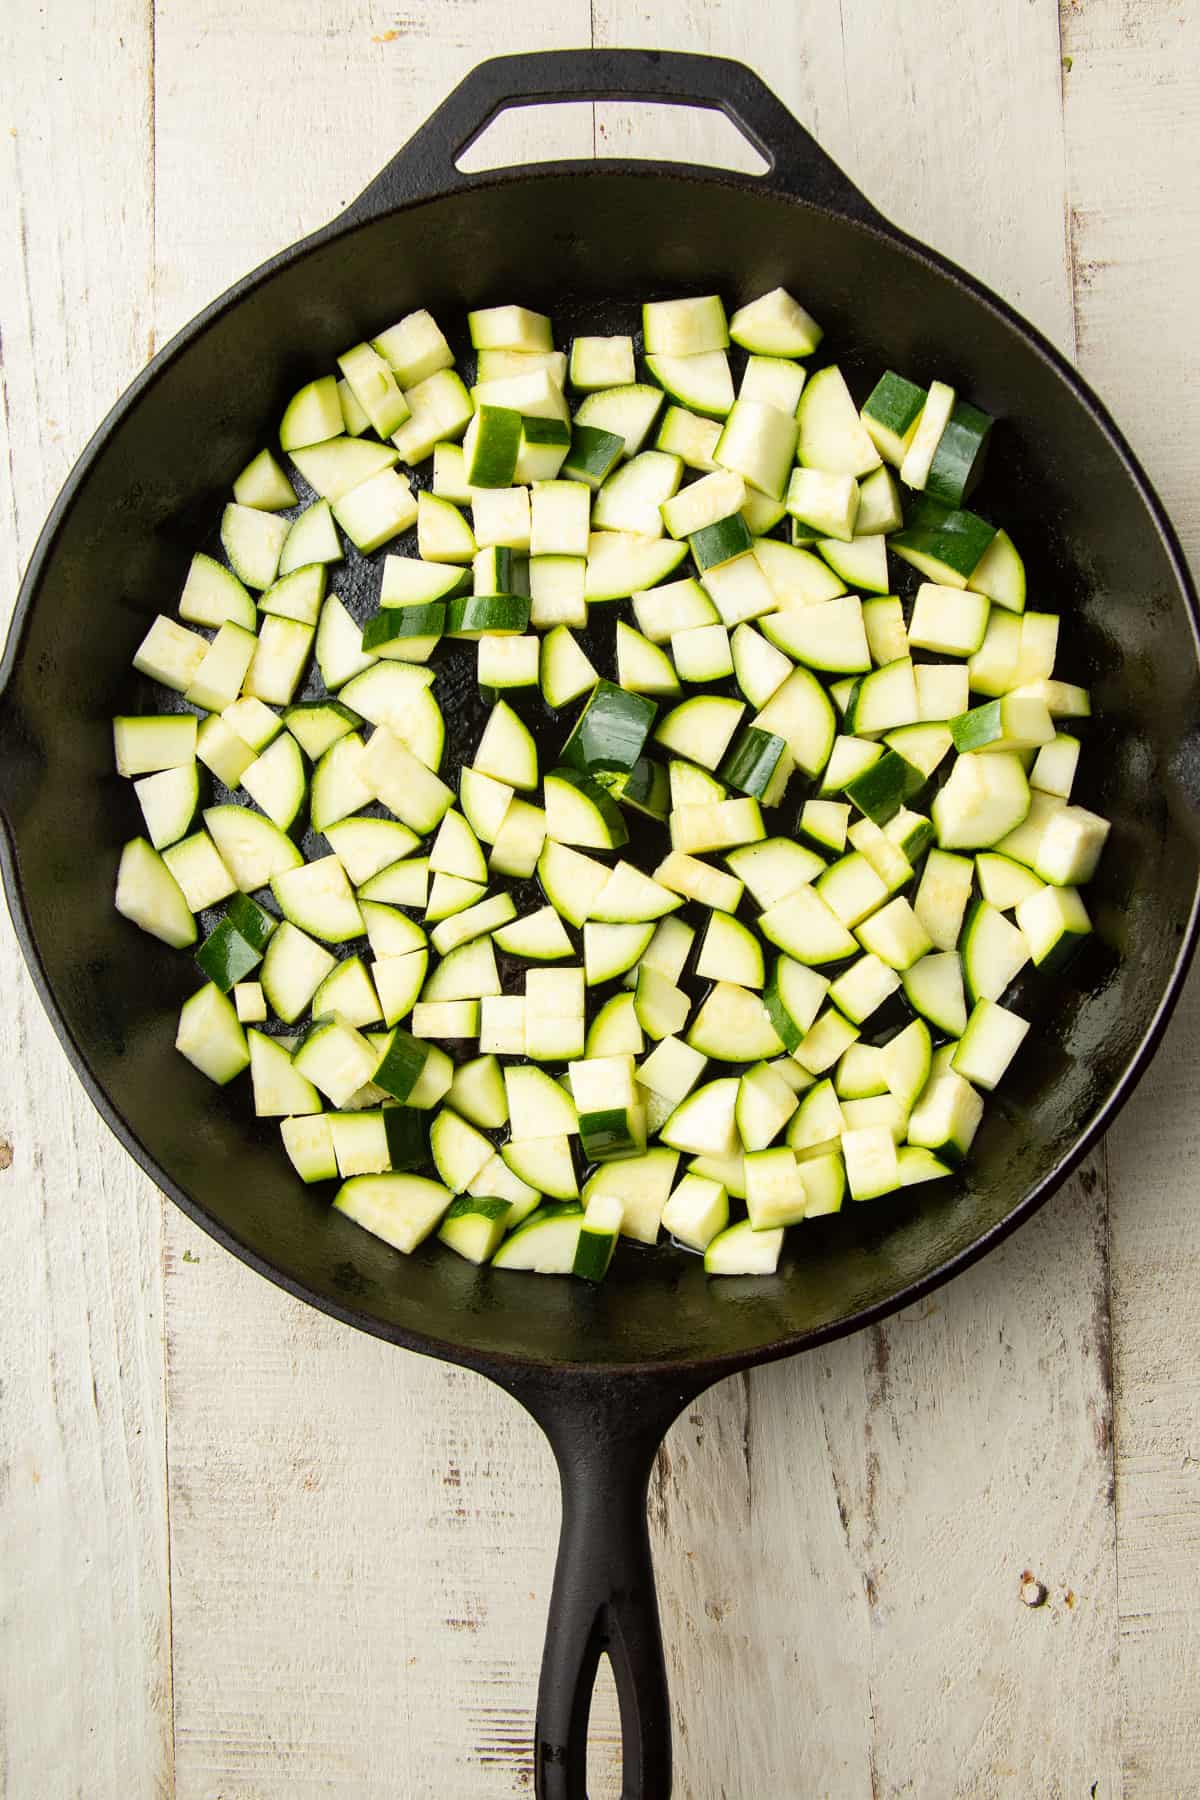 Skillet filled with chopped zucchini.